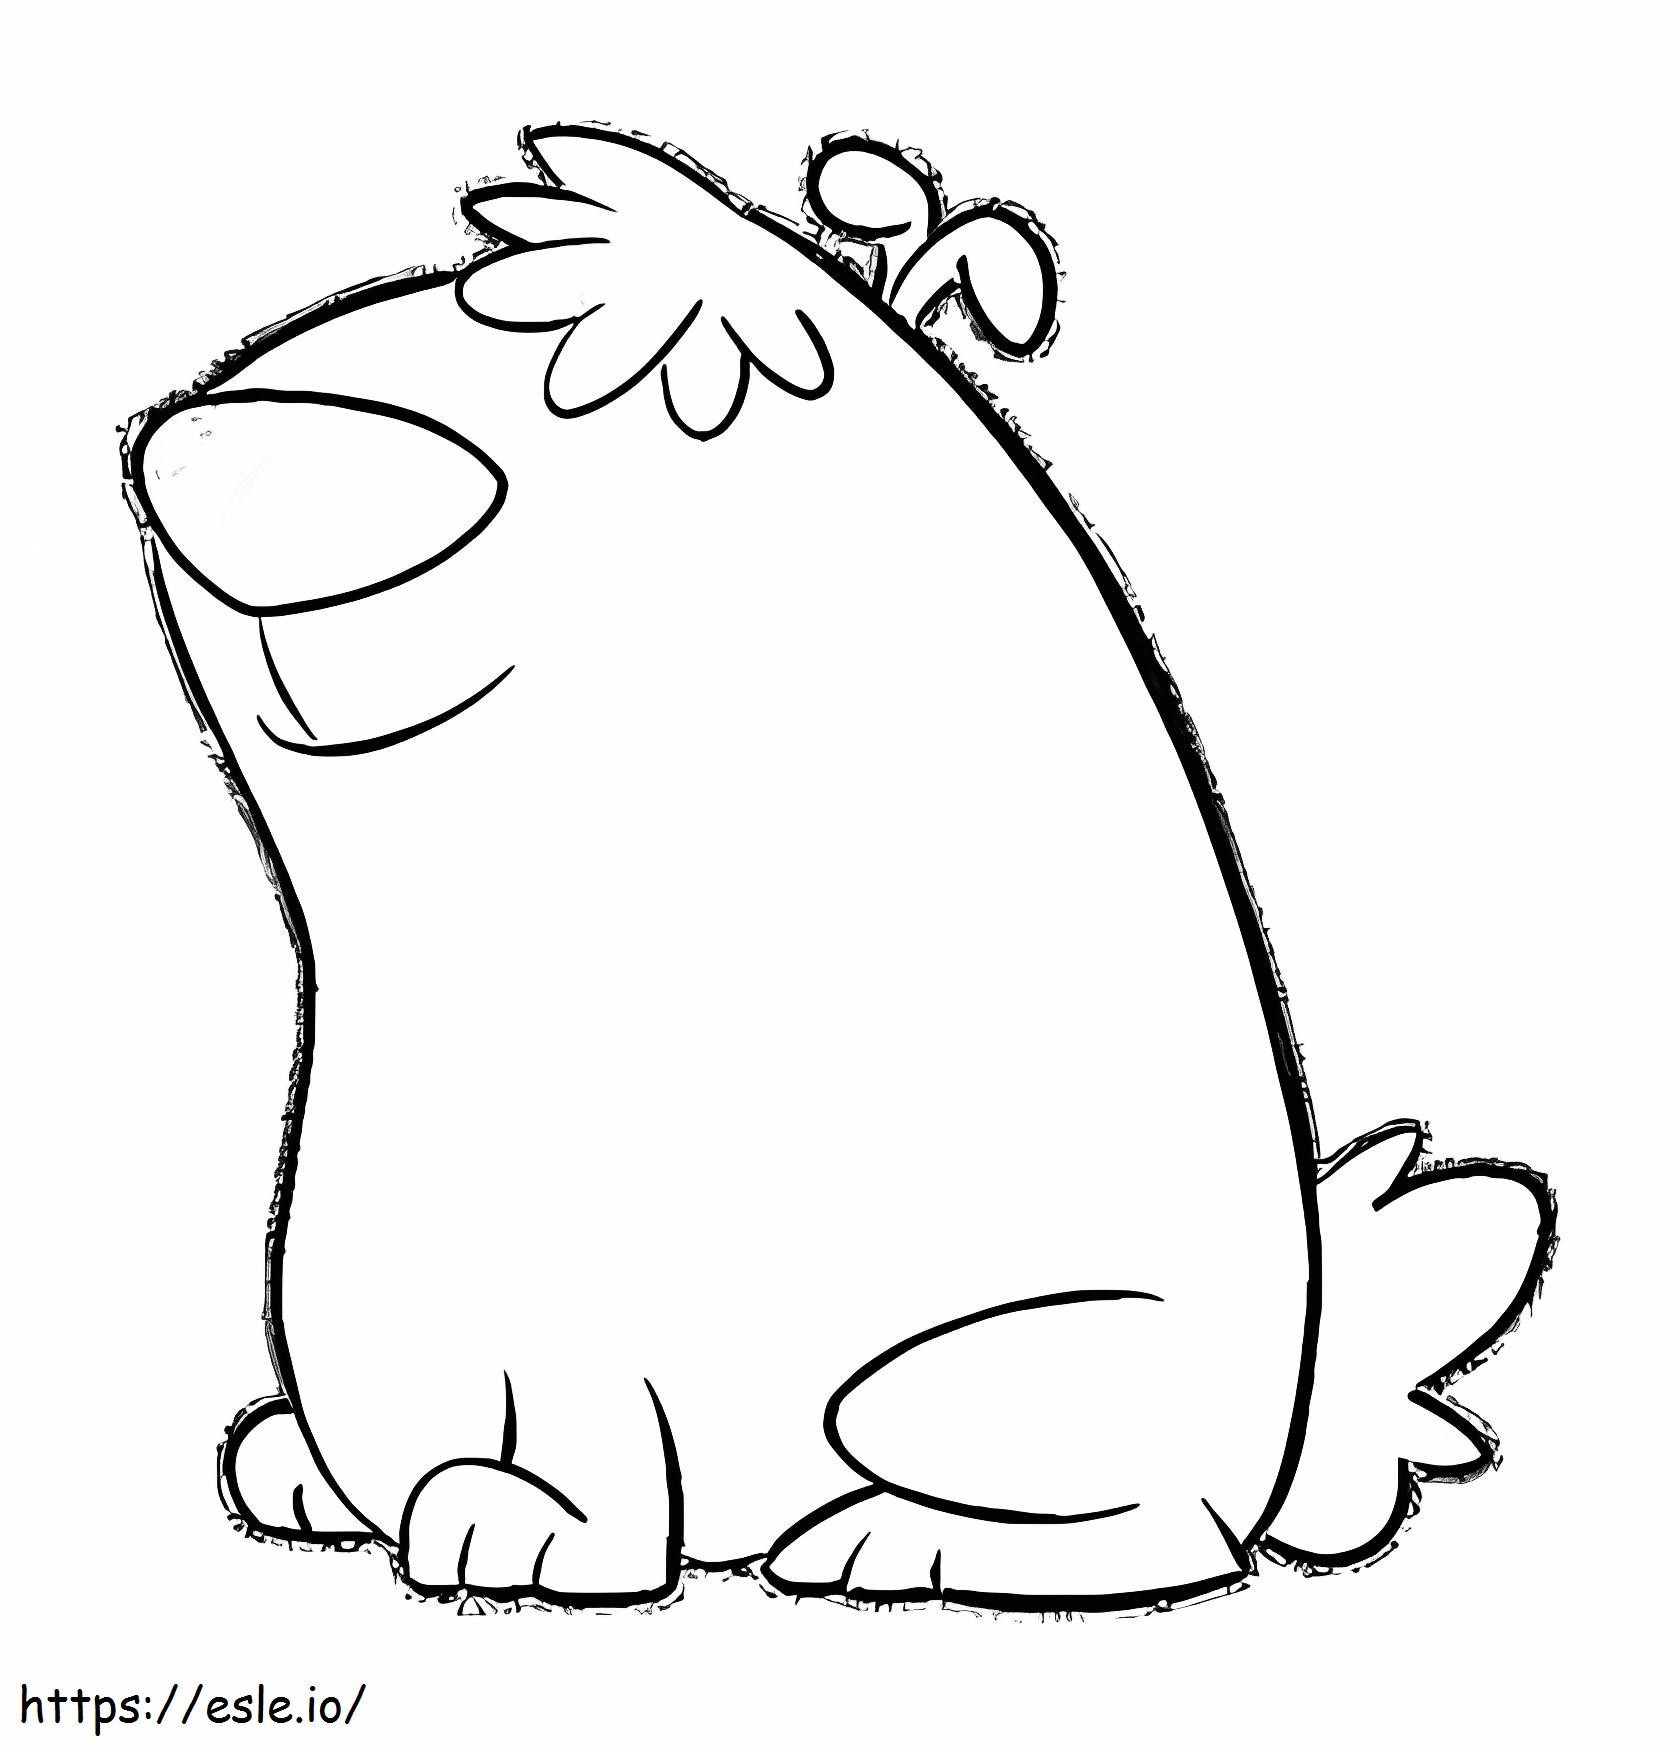 Big Dog In 2 Stupid Dogs coloring page